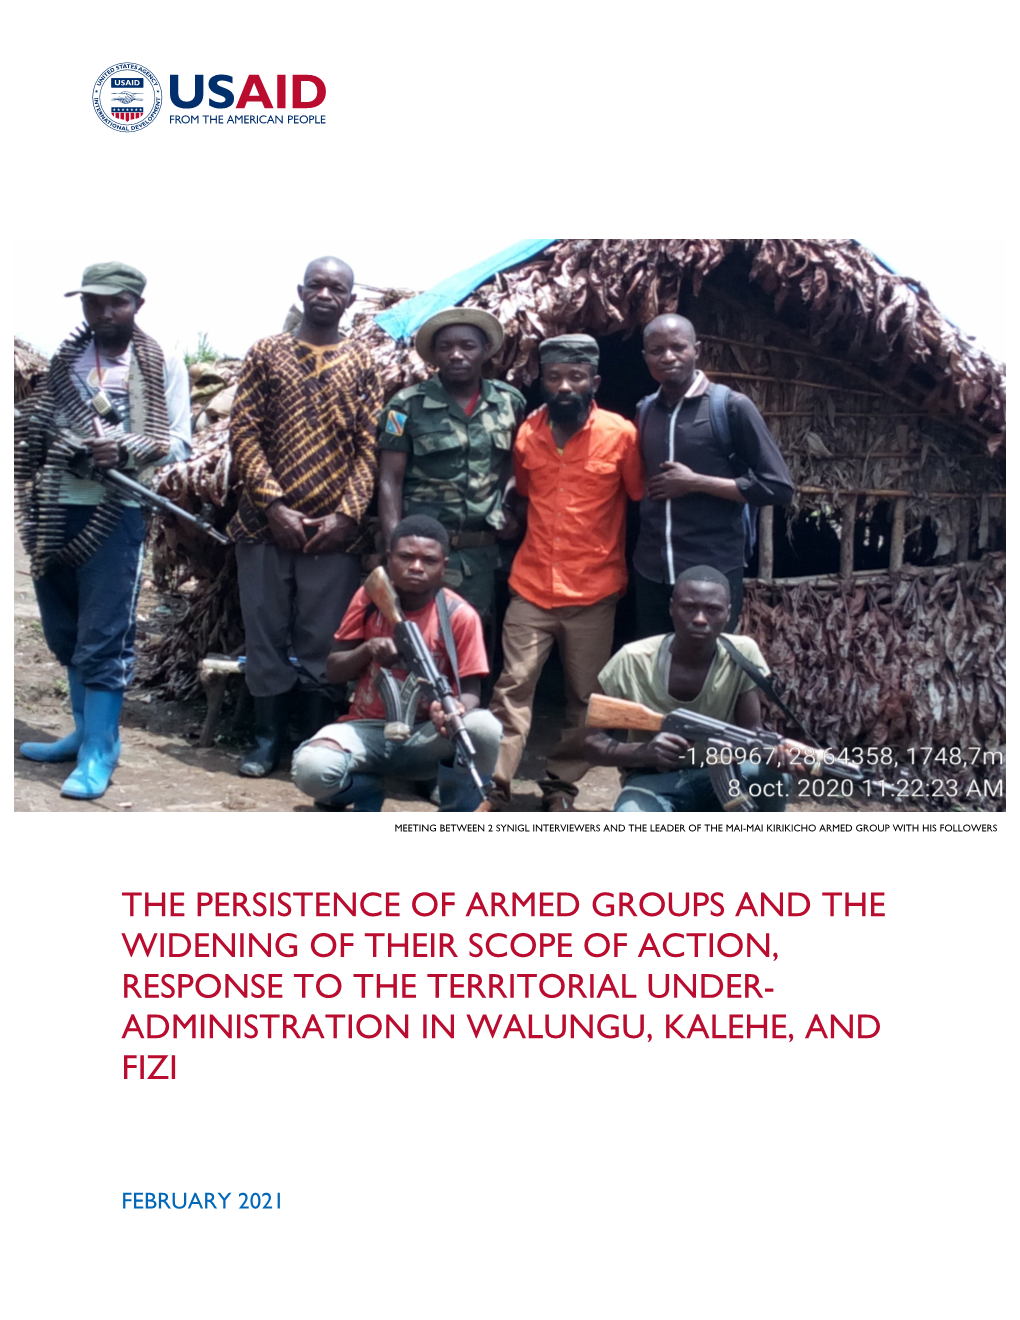 The Persistence of Armed Groups and the Widening of Their Scope of Action, Response to the Territorial Under- Administration in Walungu, Kalehe, and Fizi